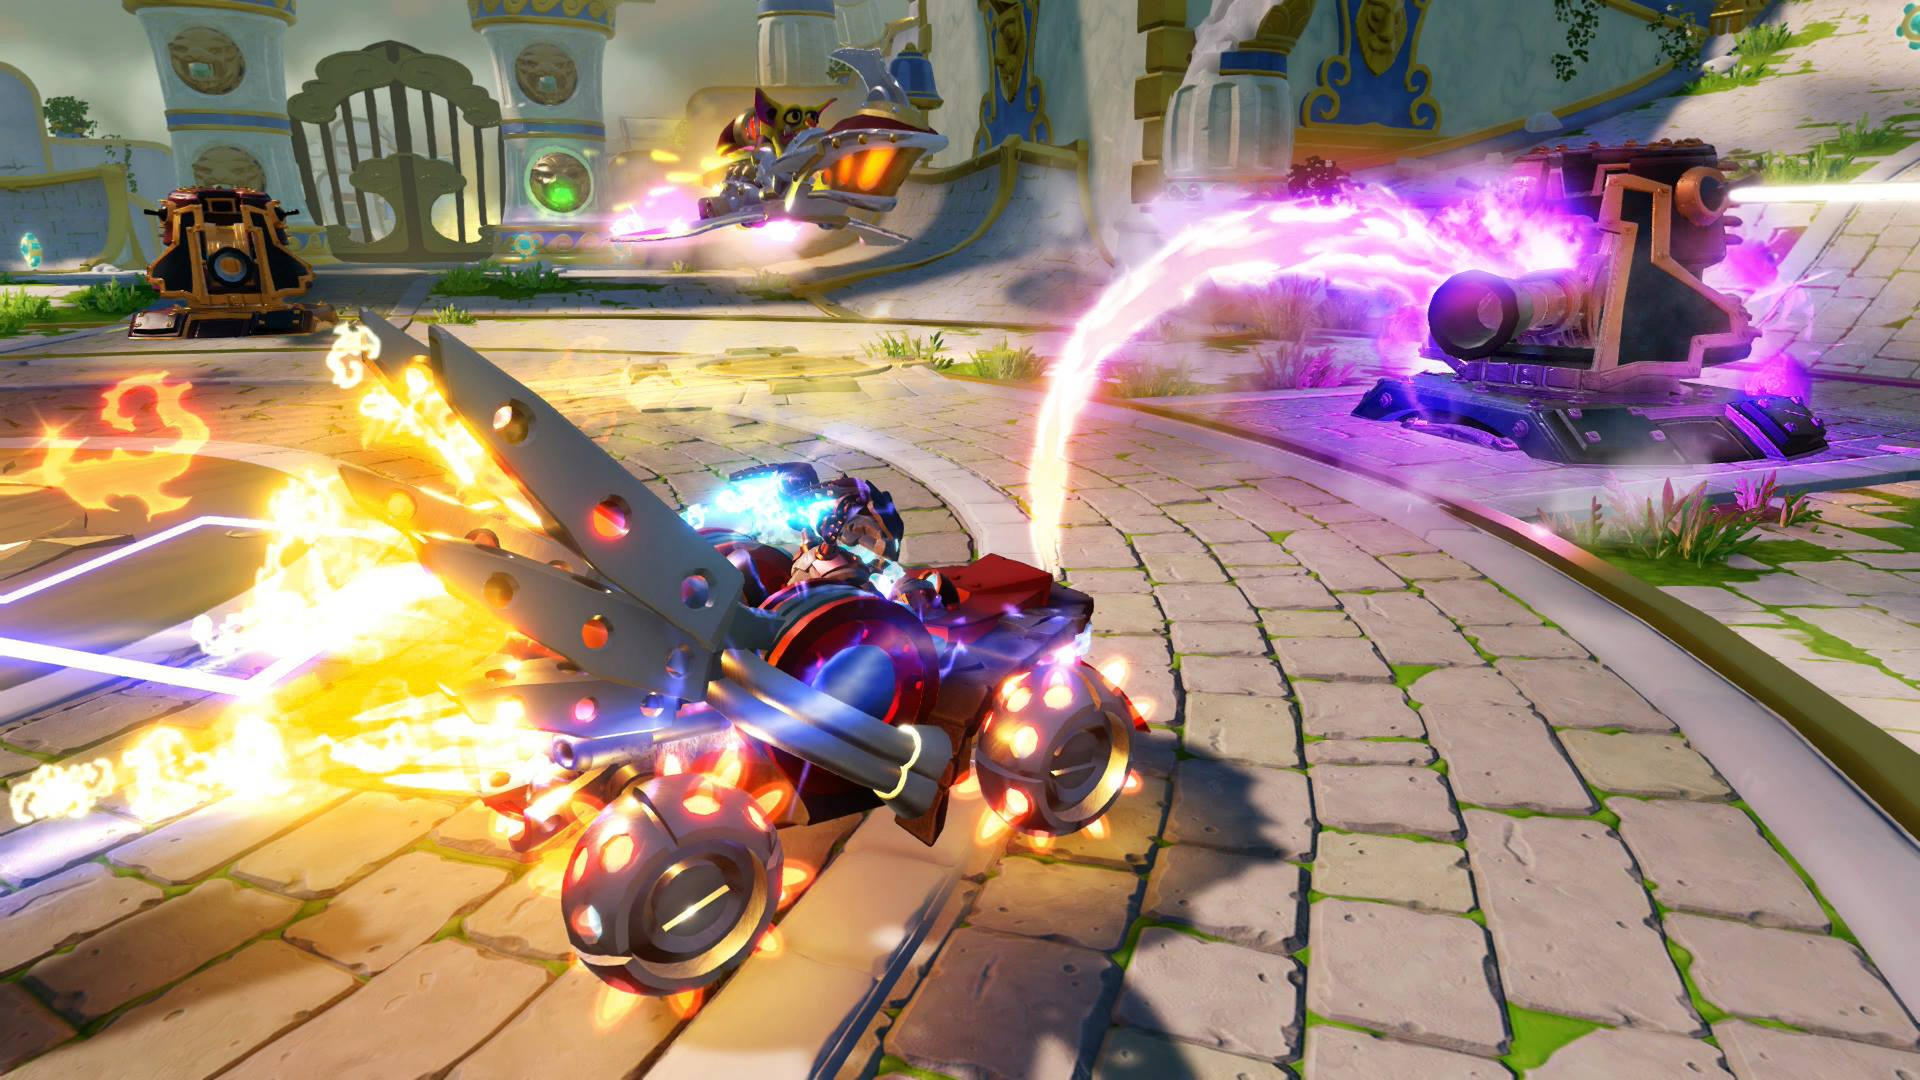 The latest Skylanders offers a variety of racing vehicles for air, land and water.  